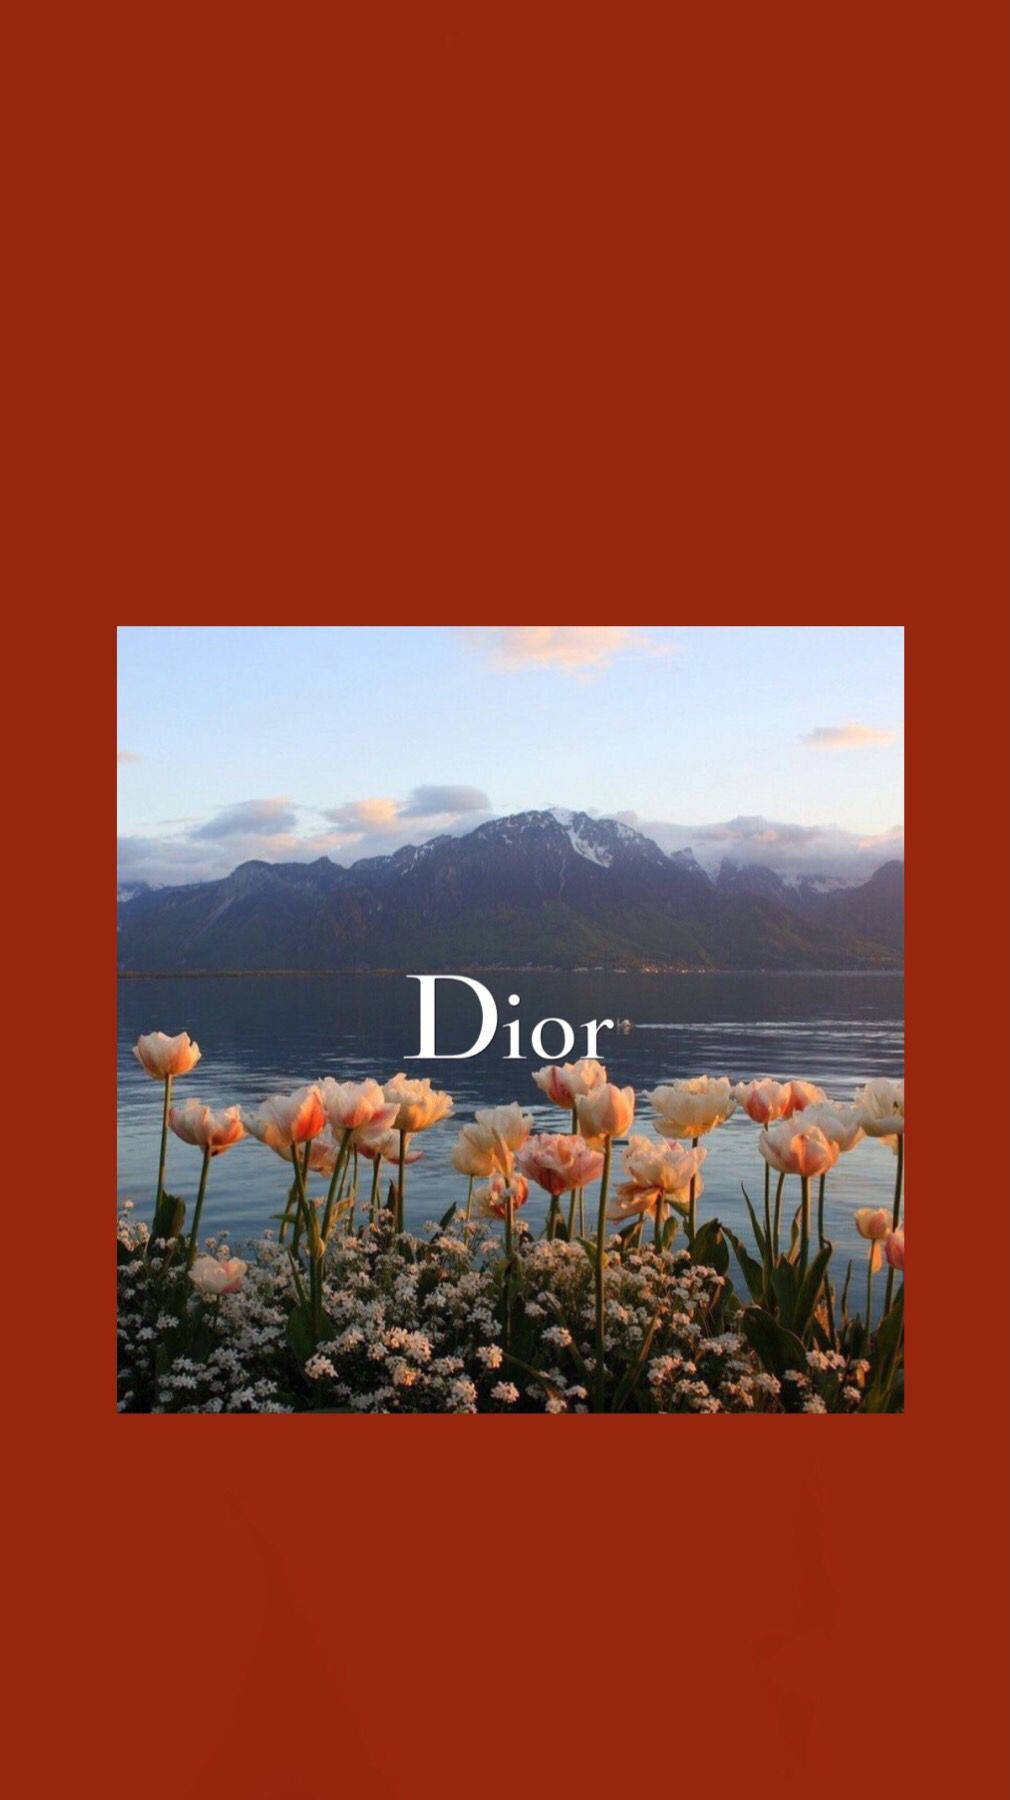 Dior 1010X1800 Wallpaper and Background Image